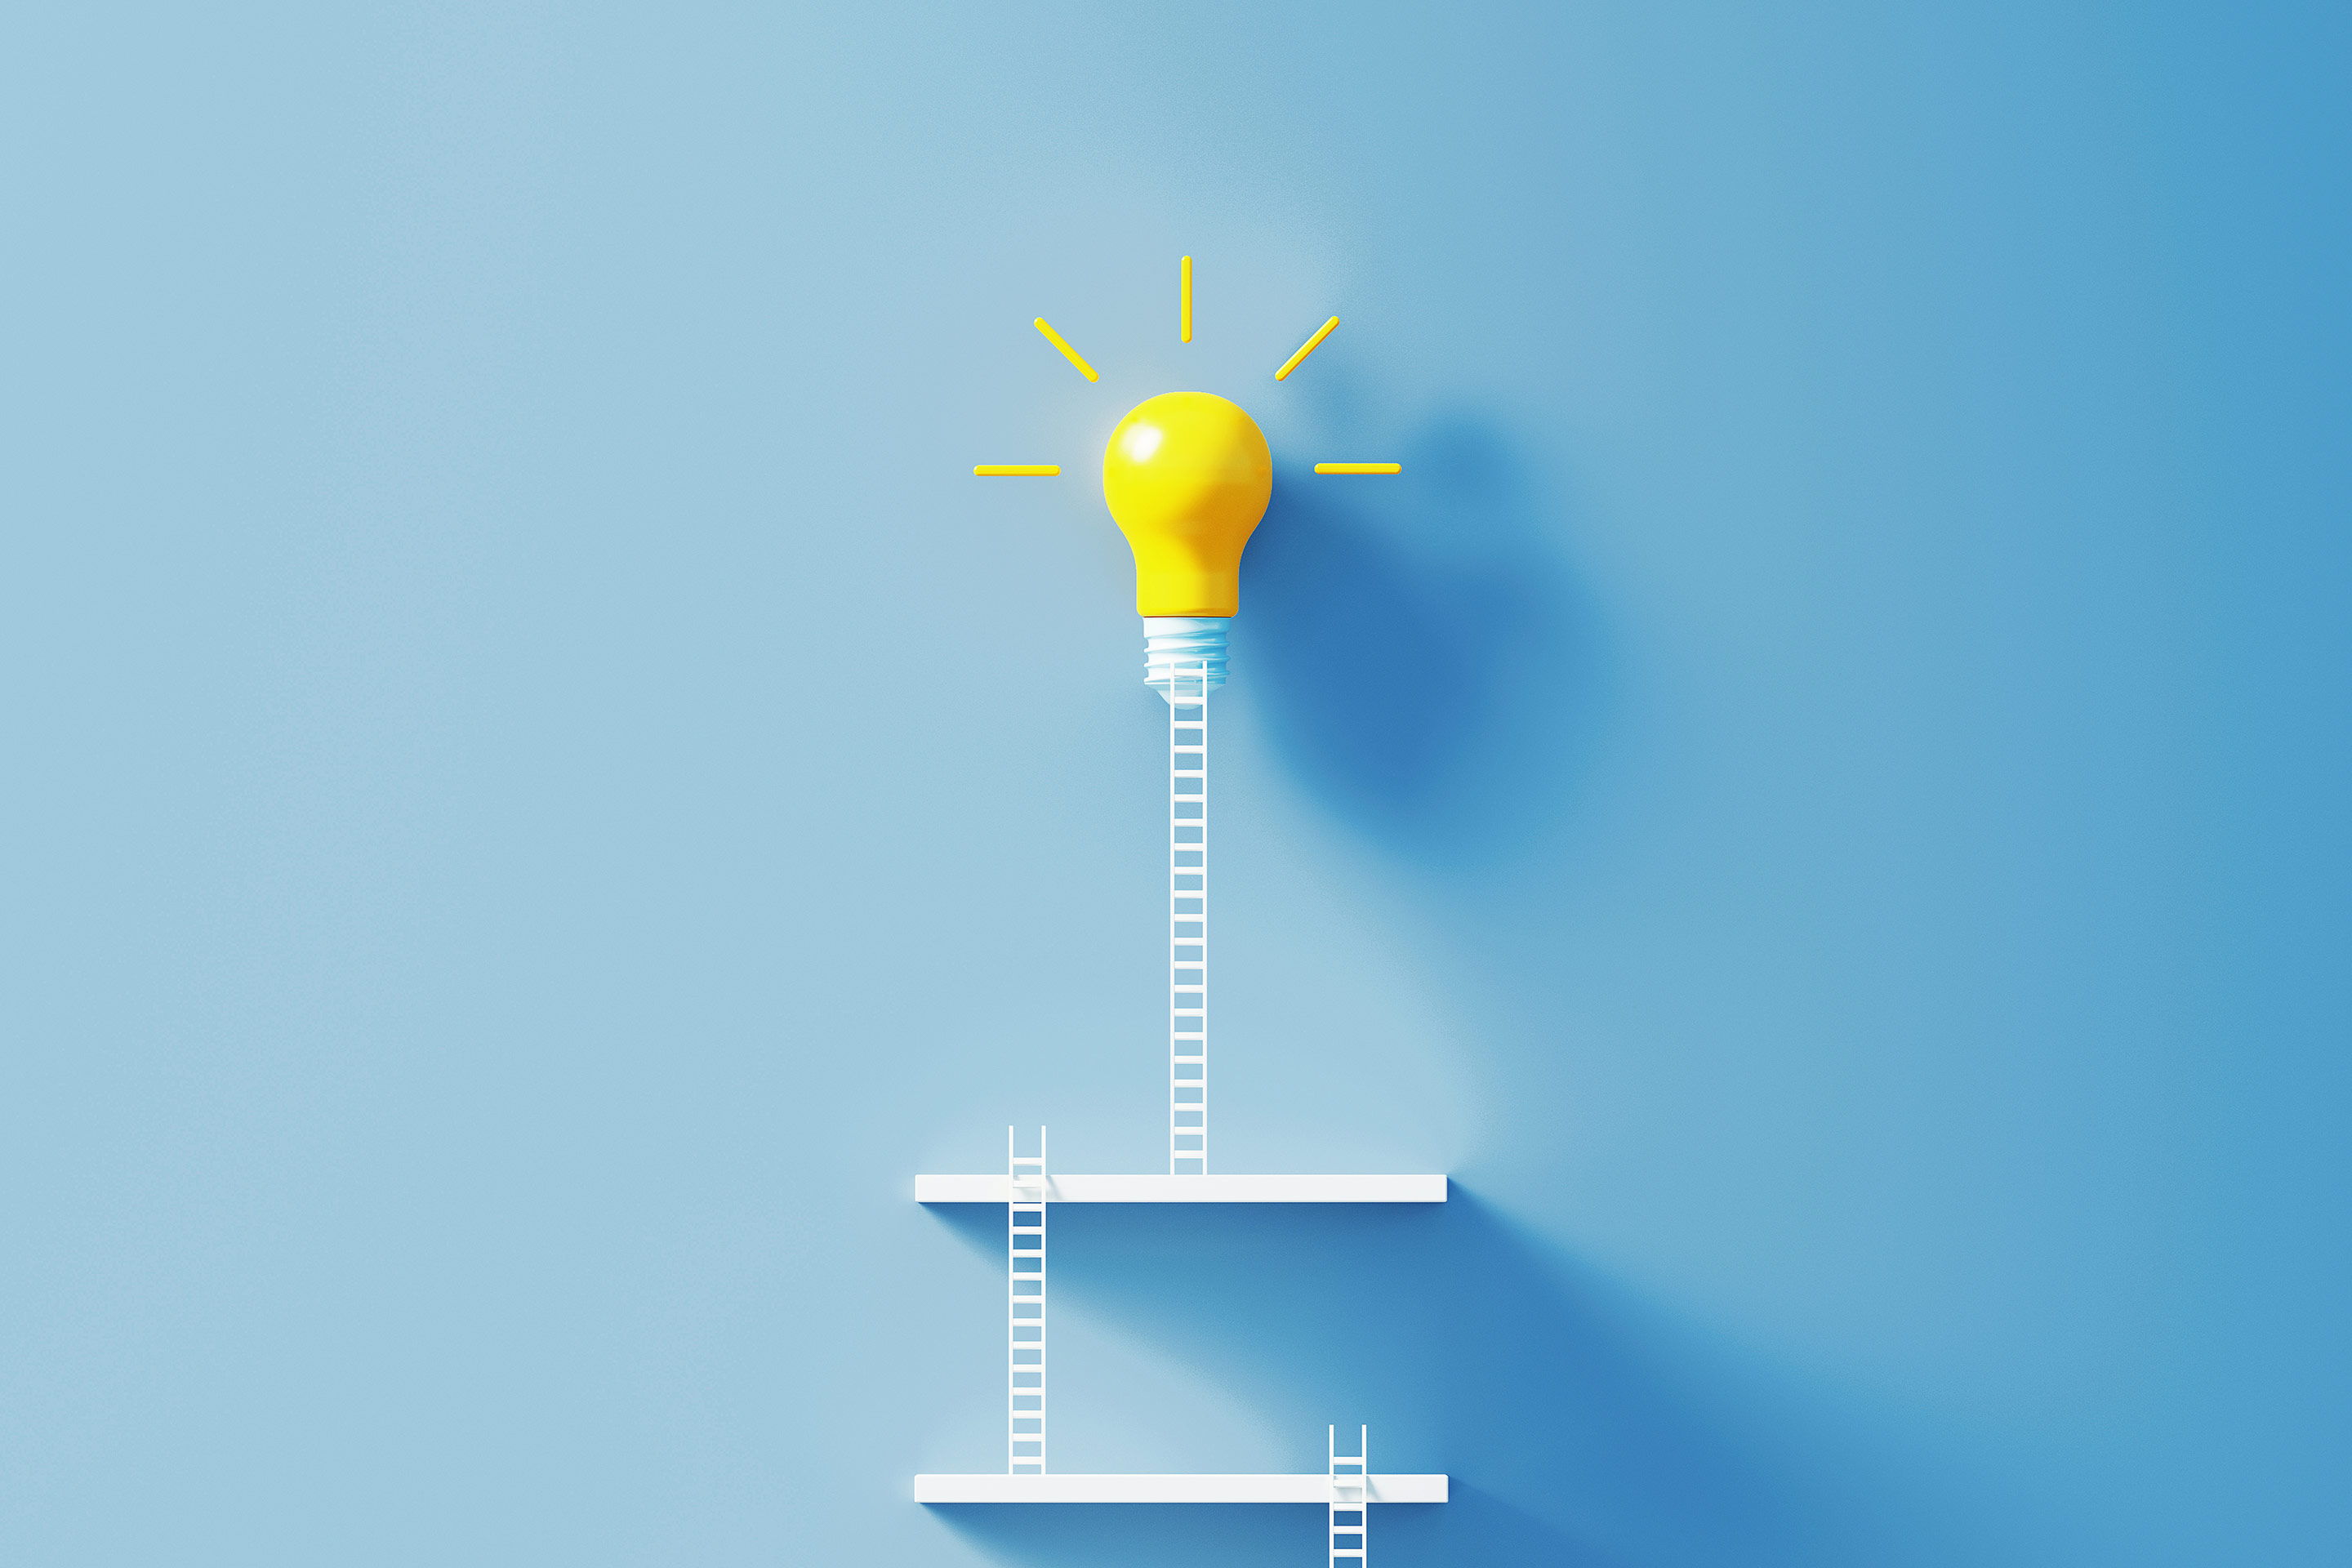 Small white ladders leading to a bright yellow lightbulb, creating a modern scene